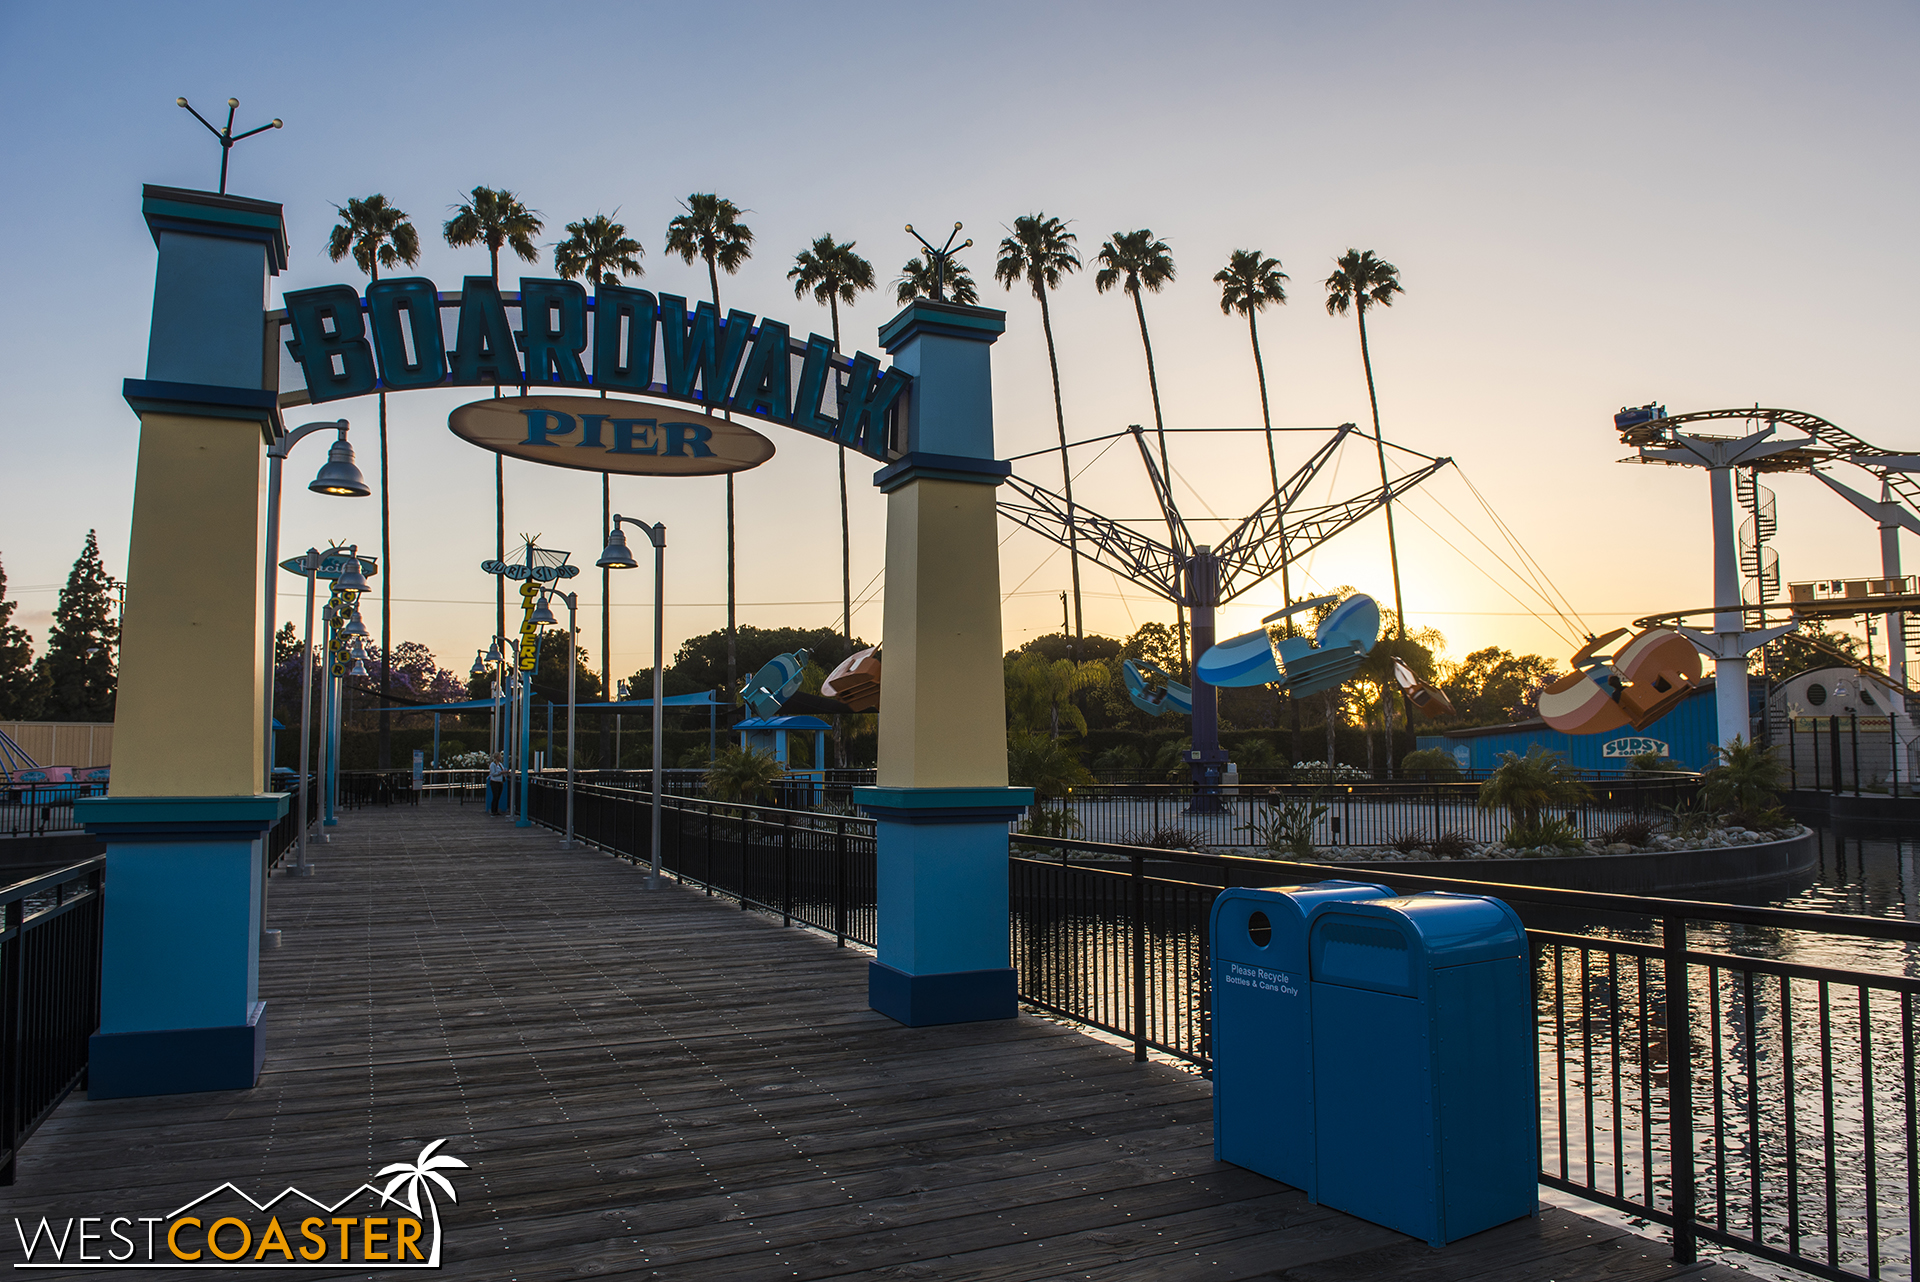  Our Thursday media night gave us some fun ERT on all the Boardwalk attractions. 